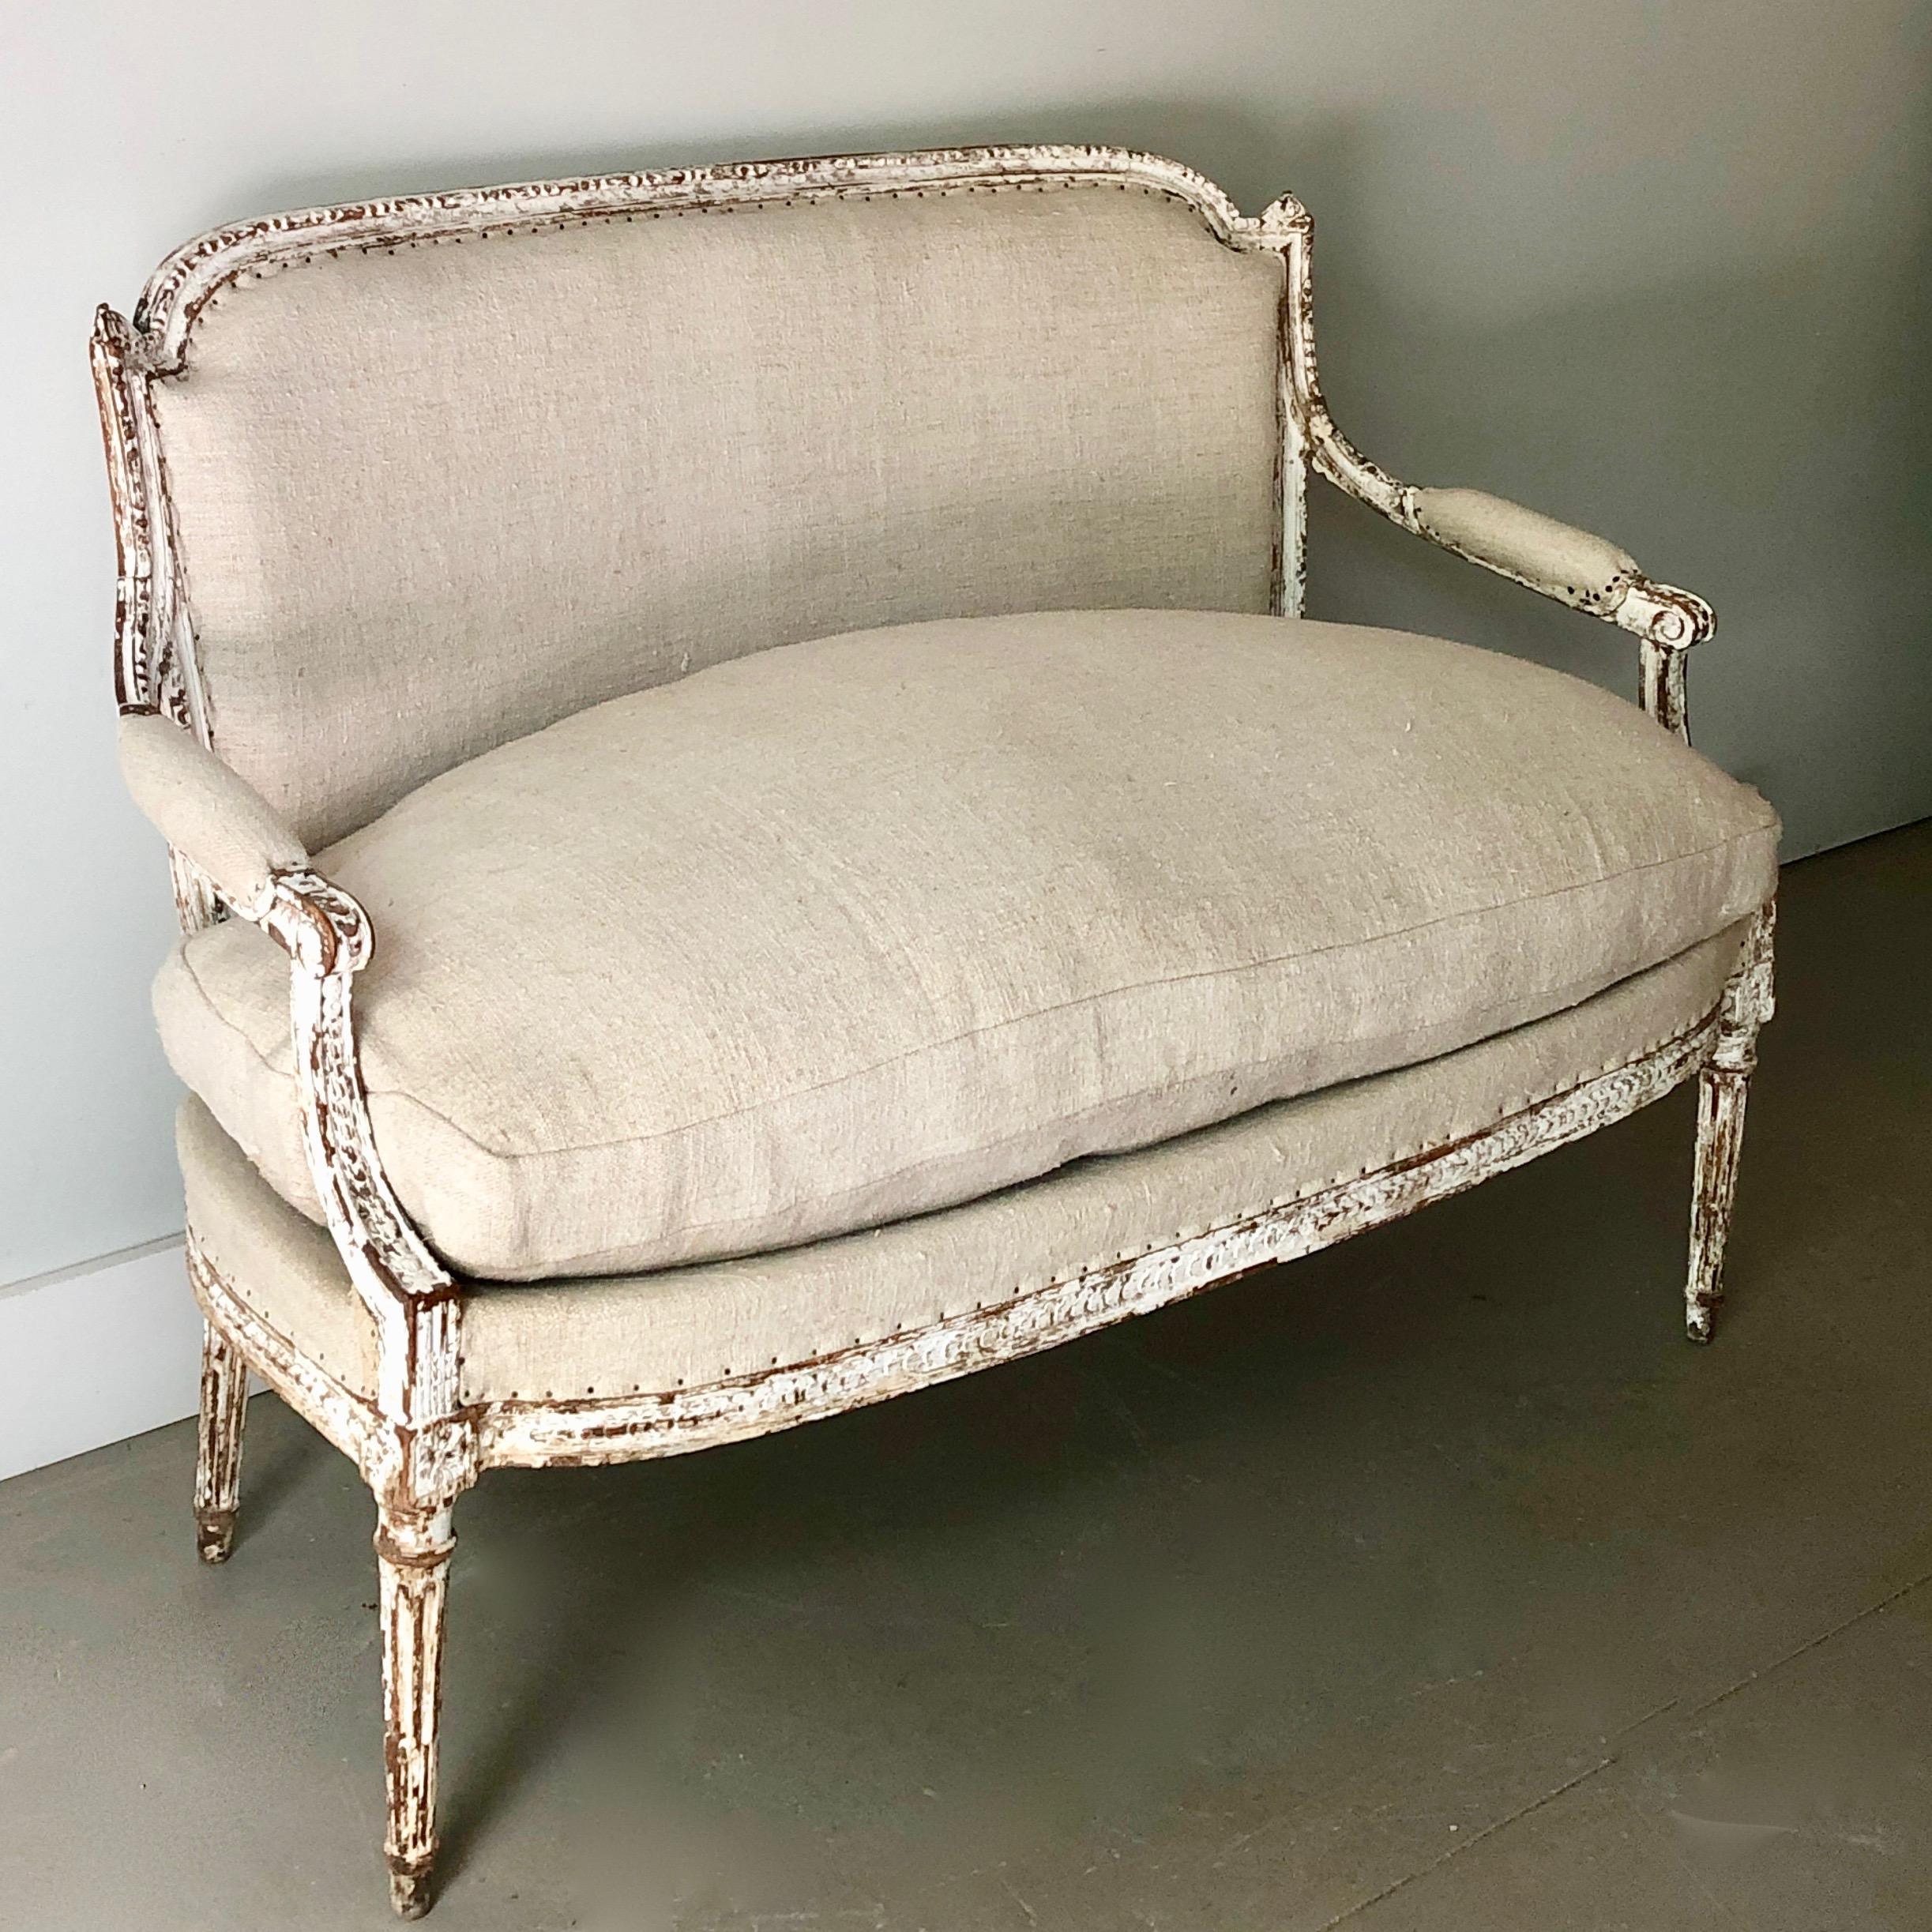 19th century small, charming French Louis XVI style settee with elegant carved details on shaped back rail, knees and aprons and very soft 